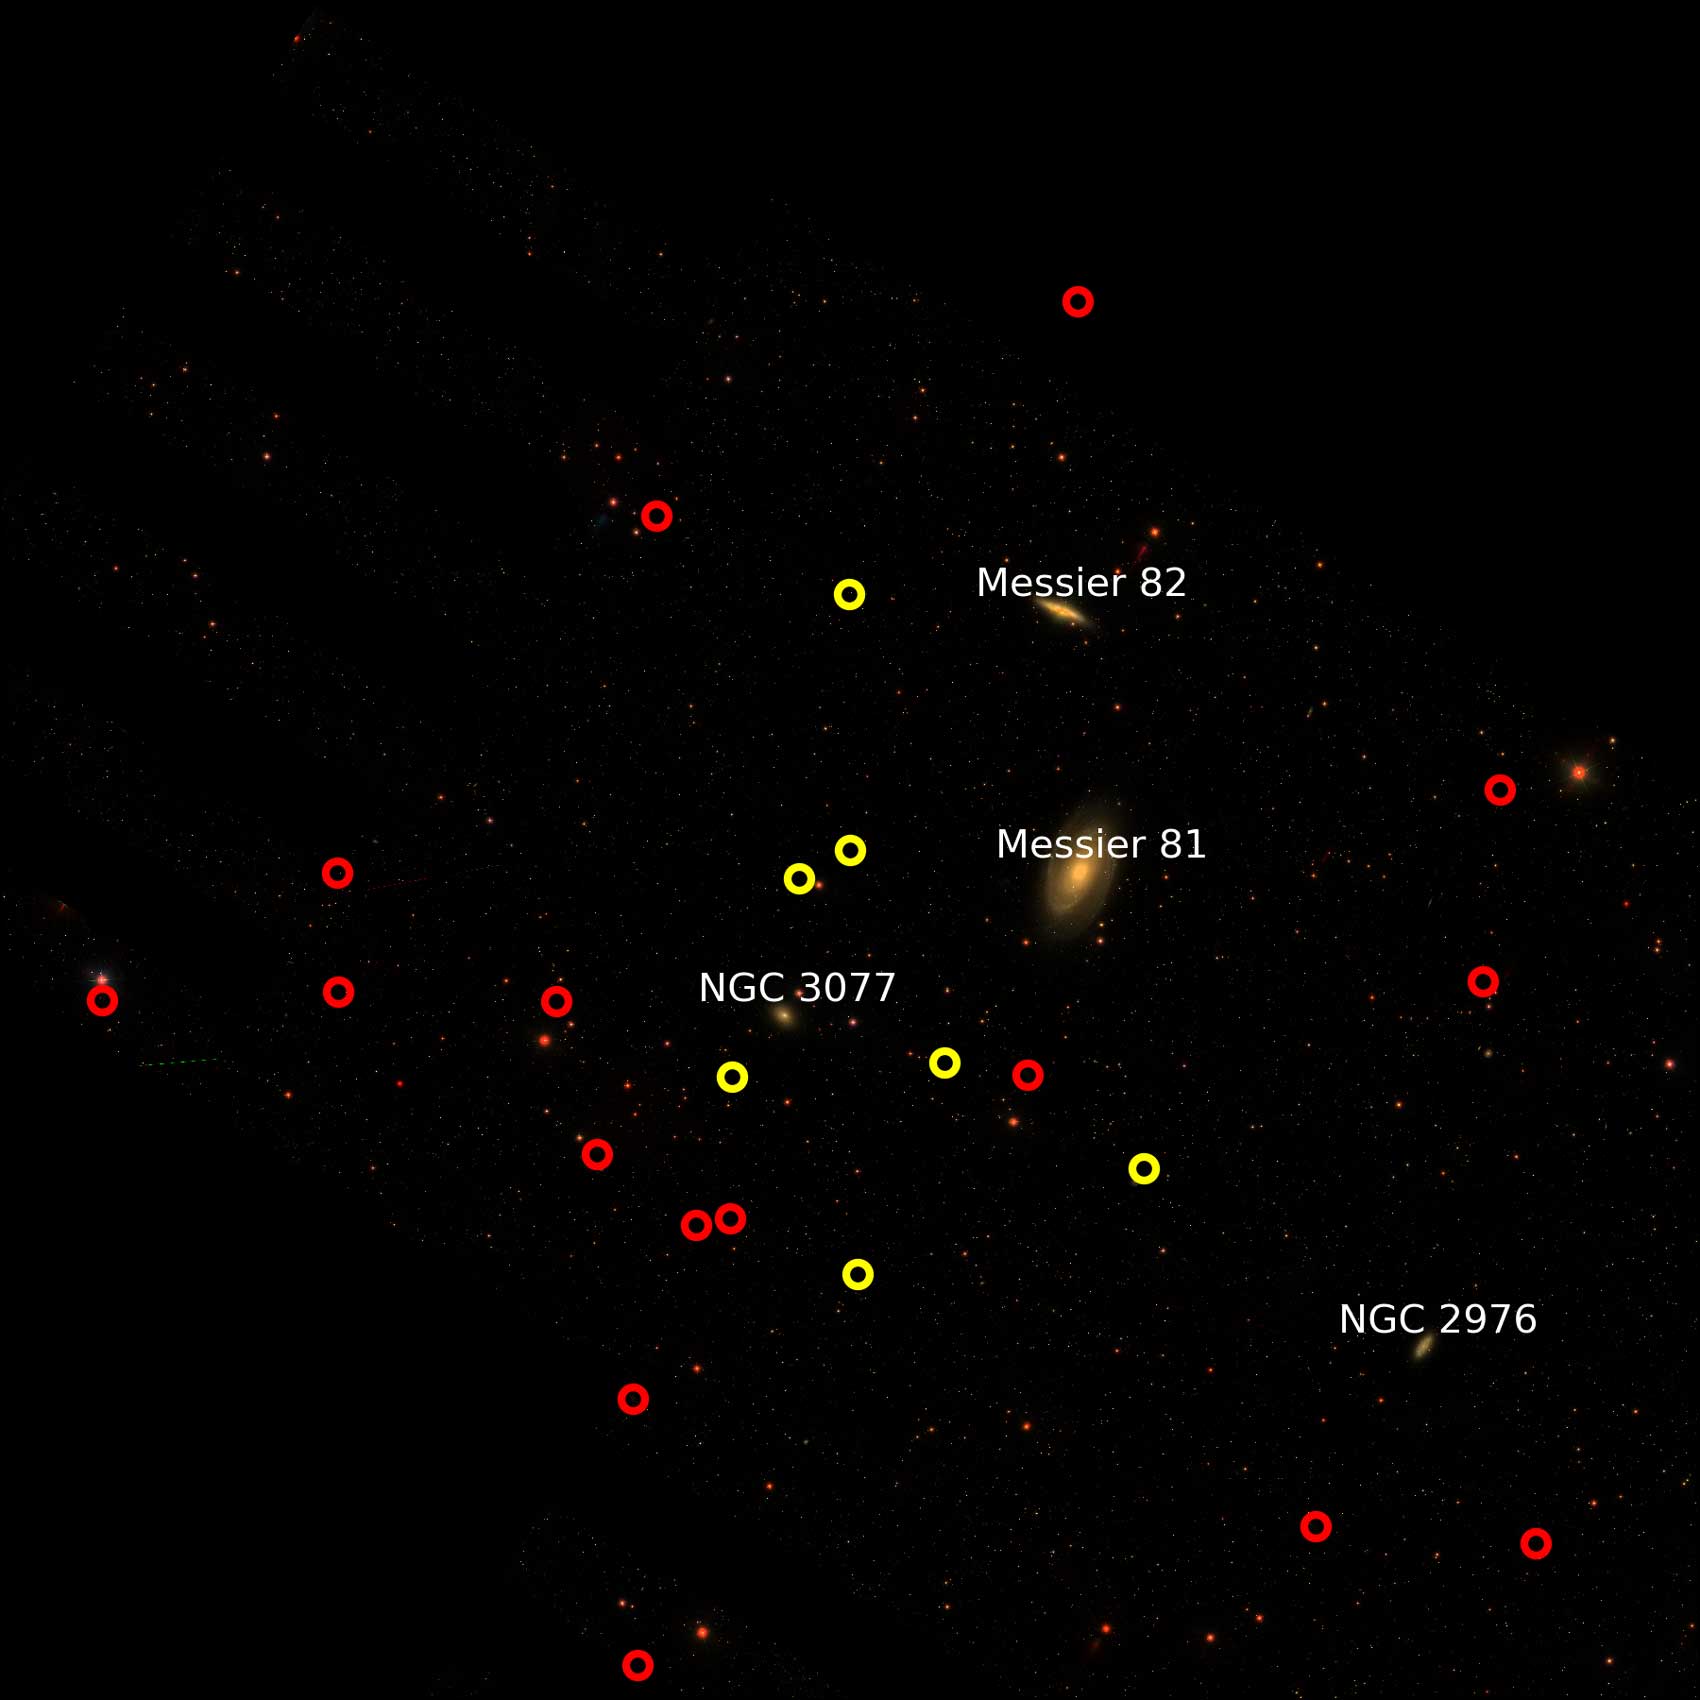 stars plotted and labeled against a black background